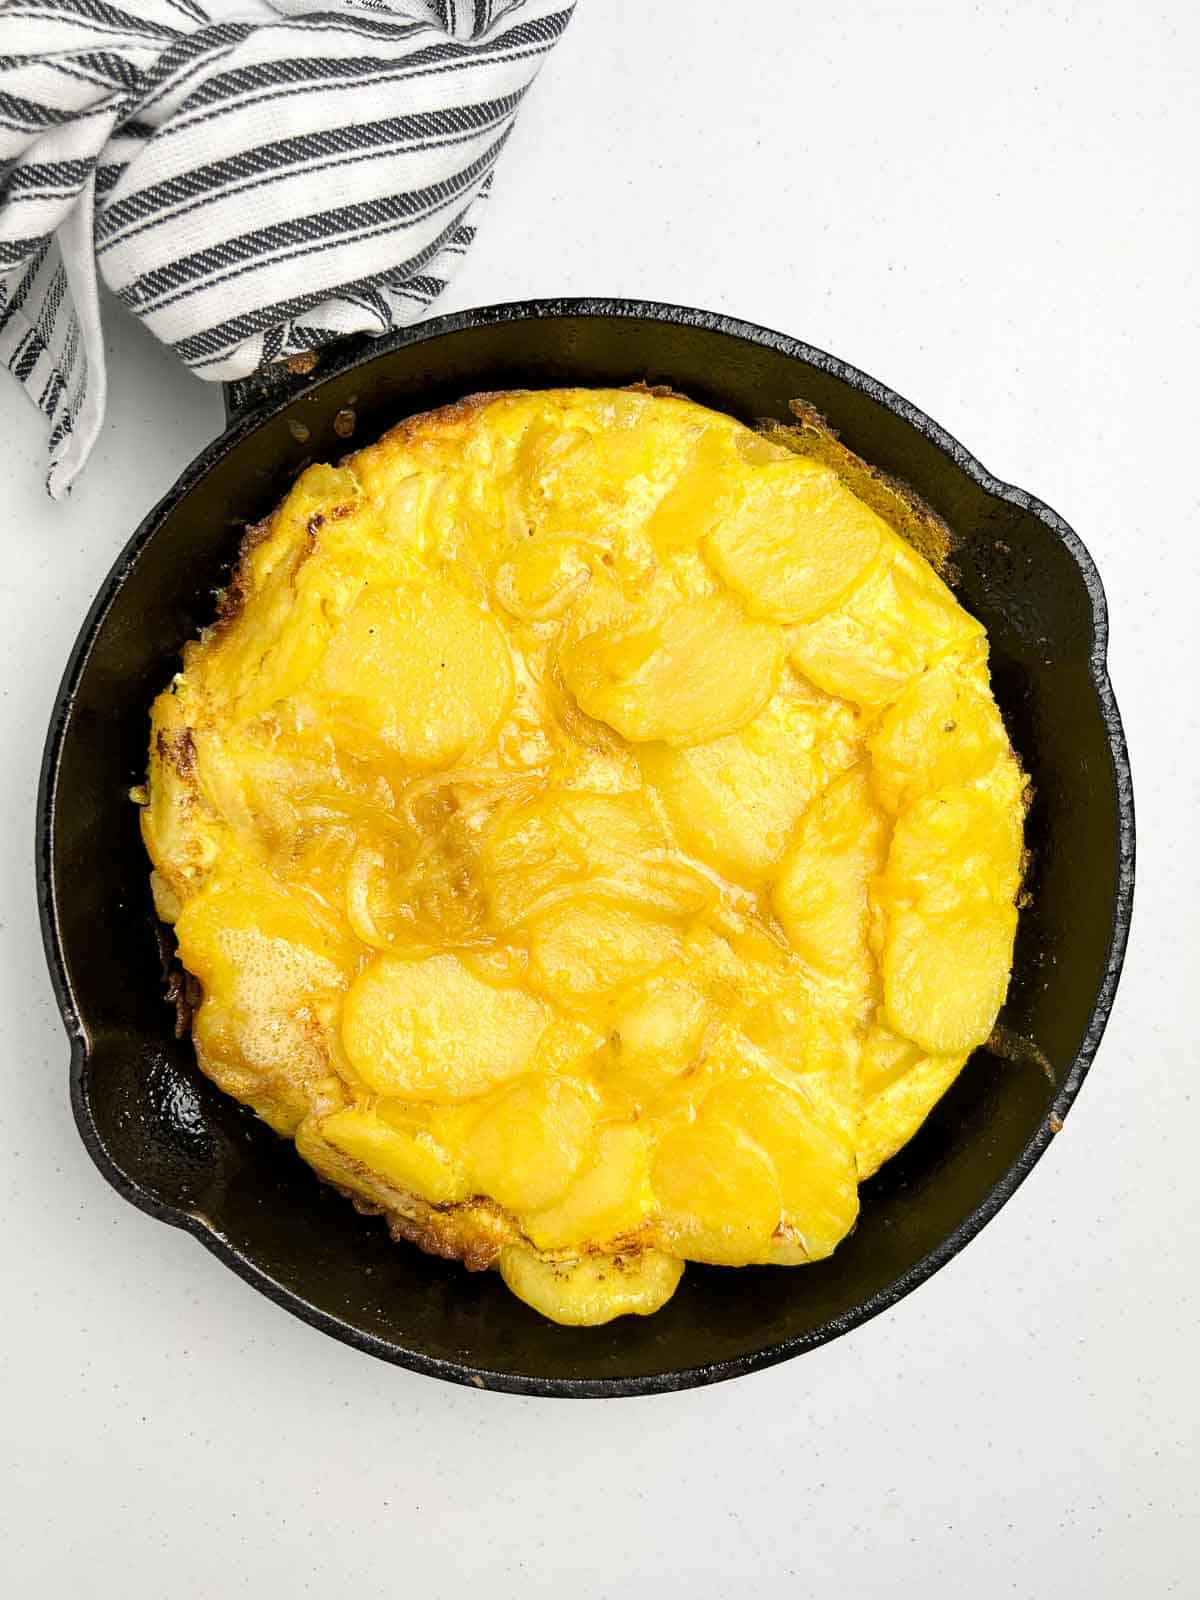 Baked Tortilla Española in an oven-proof skillet.